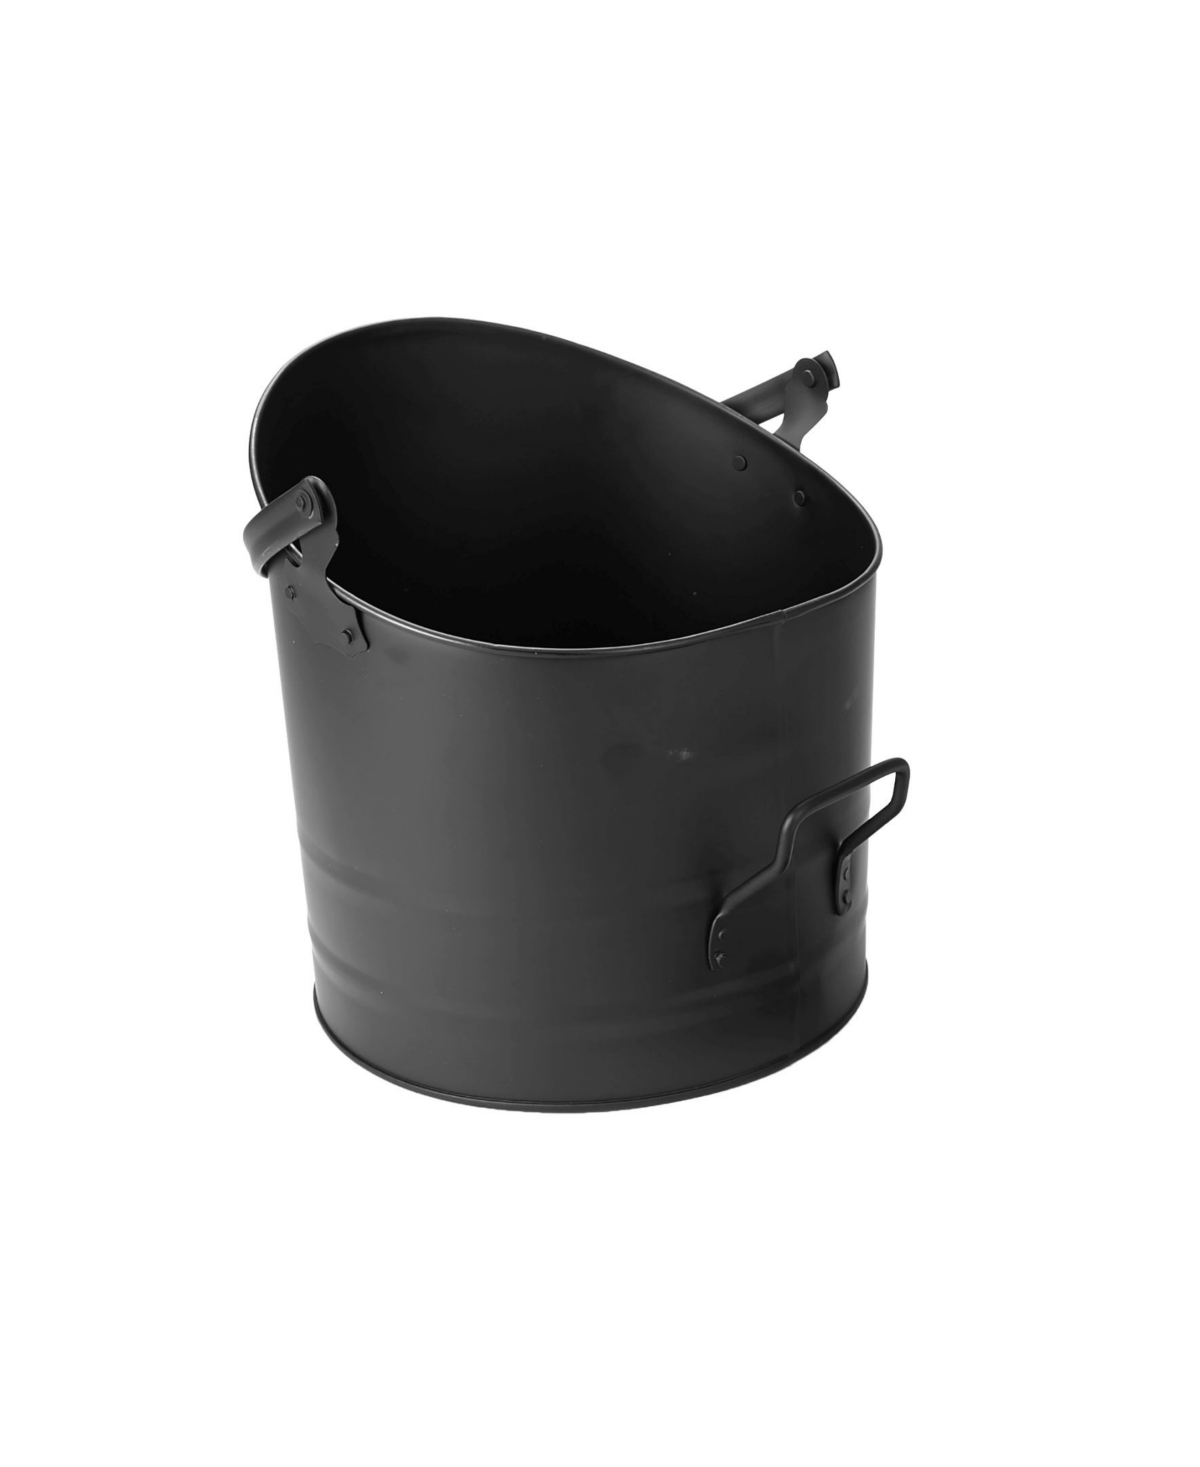 Large Fireplace Bucket with Handle, 11.25" - Black